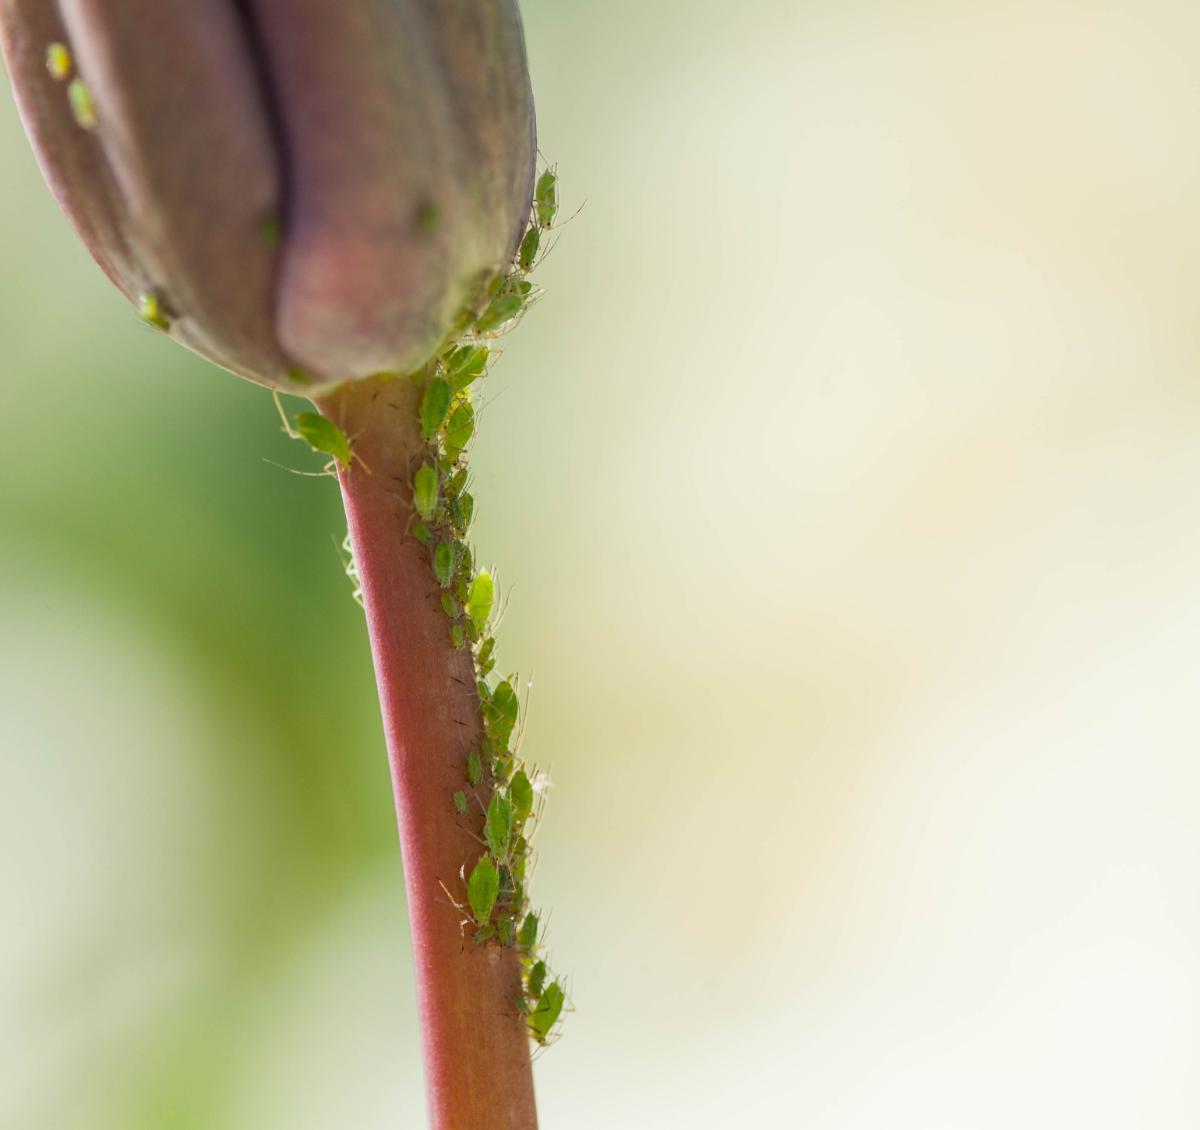 Aphids on a tulip